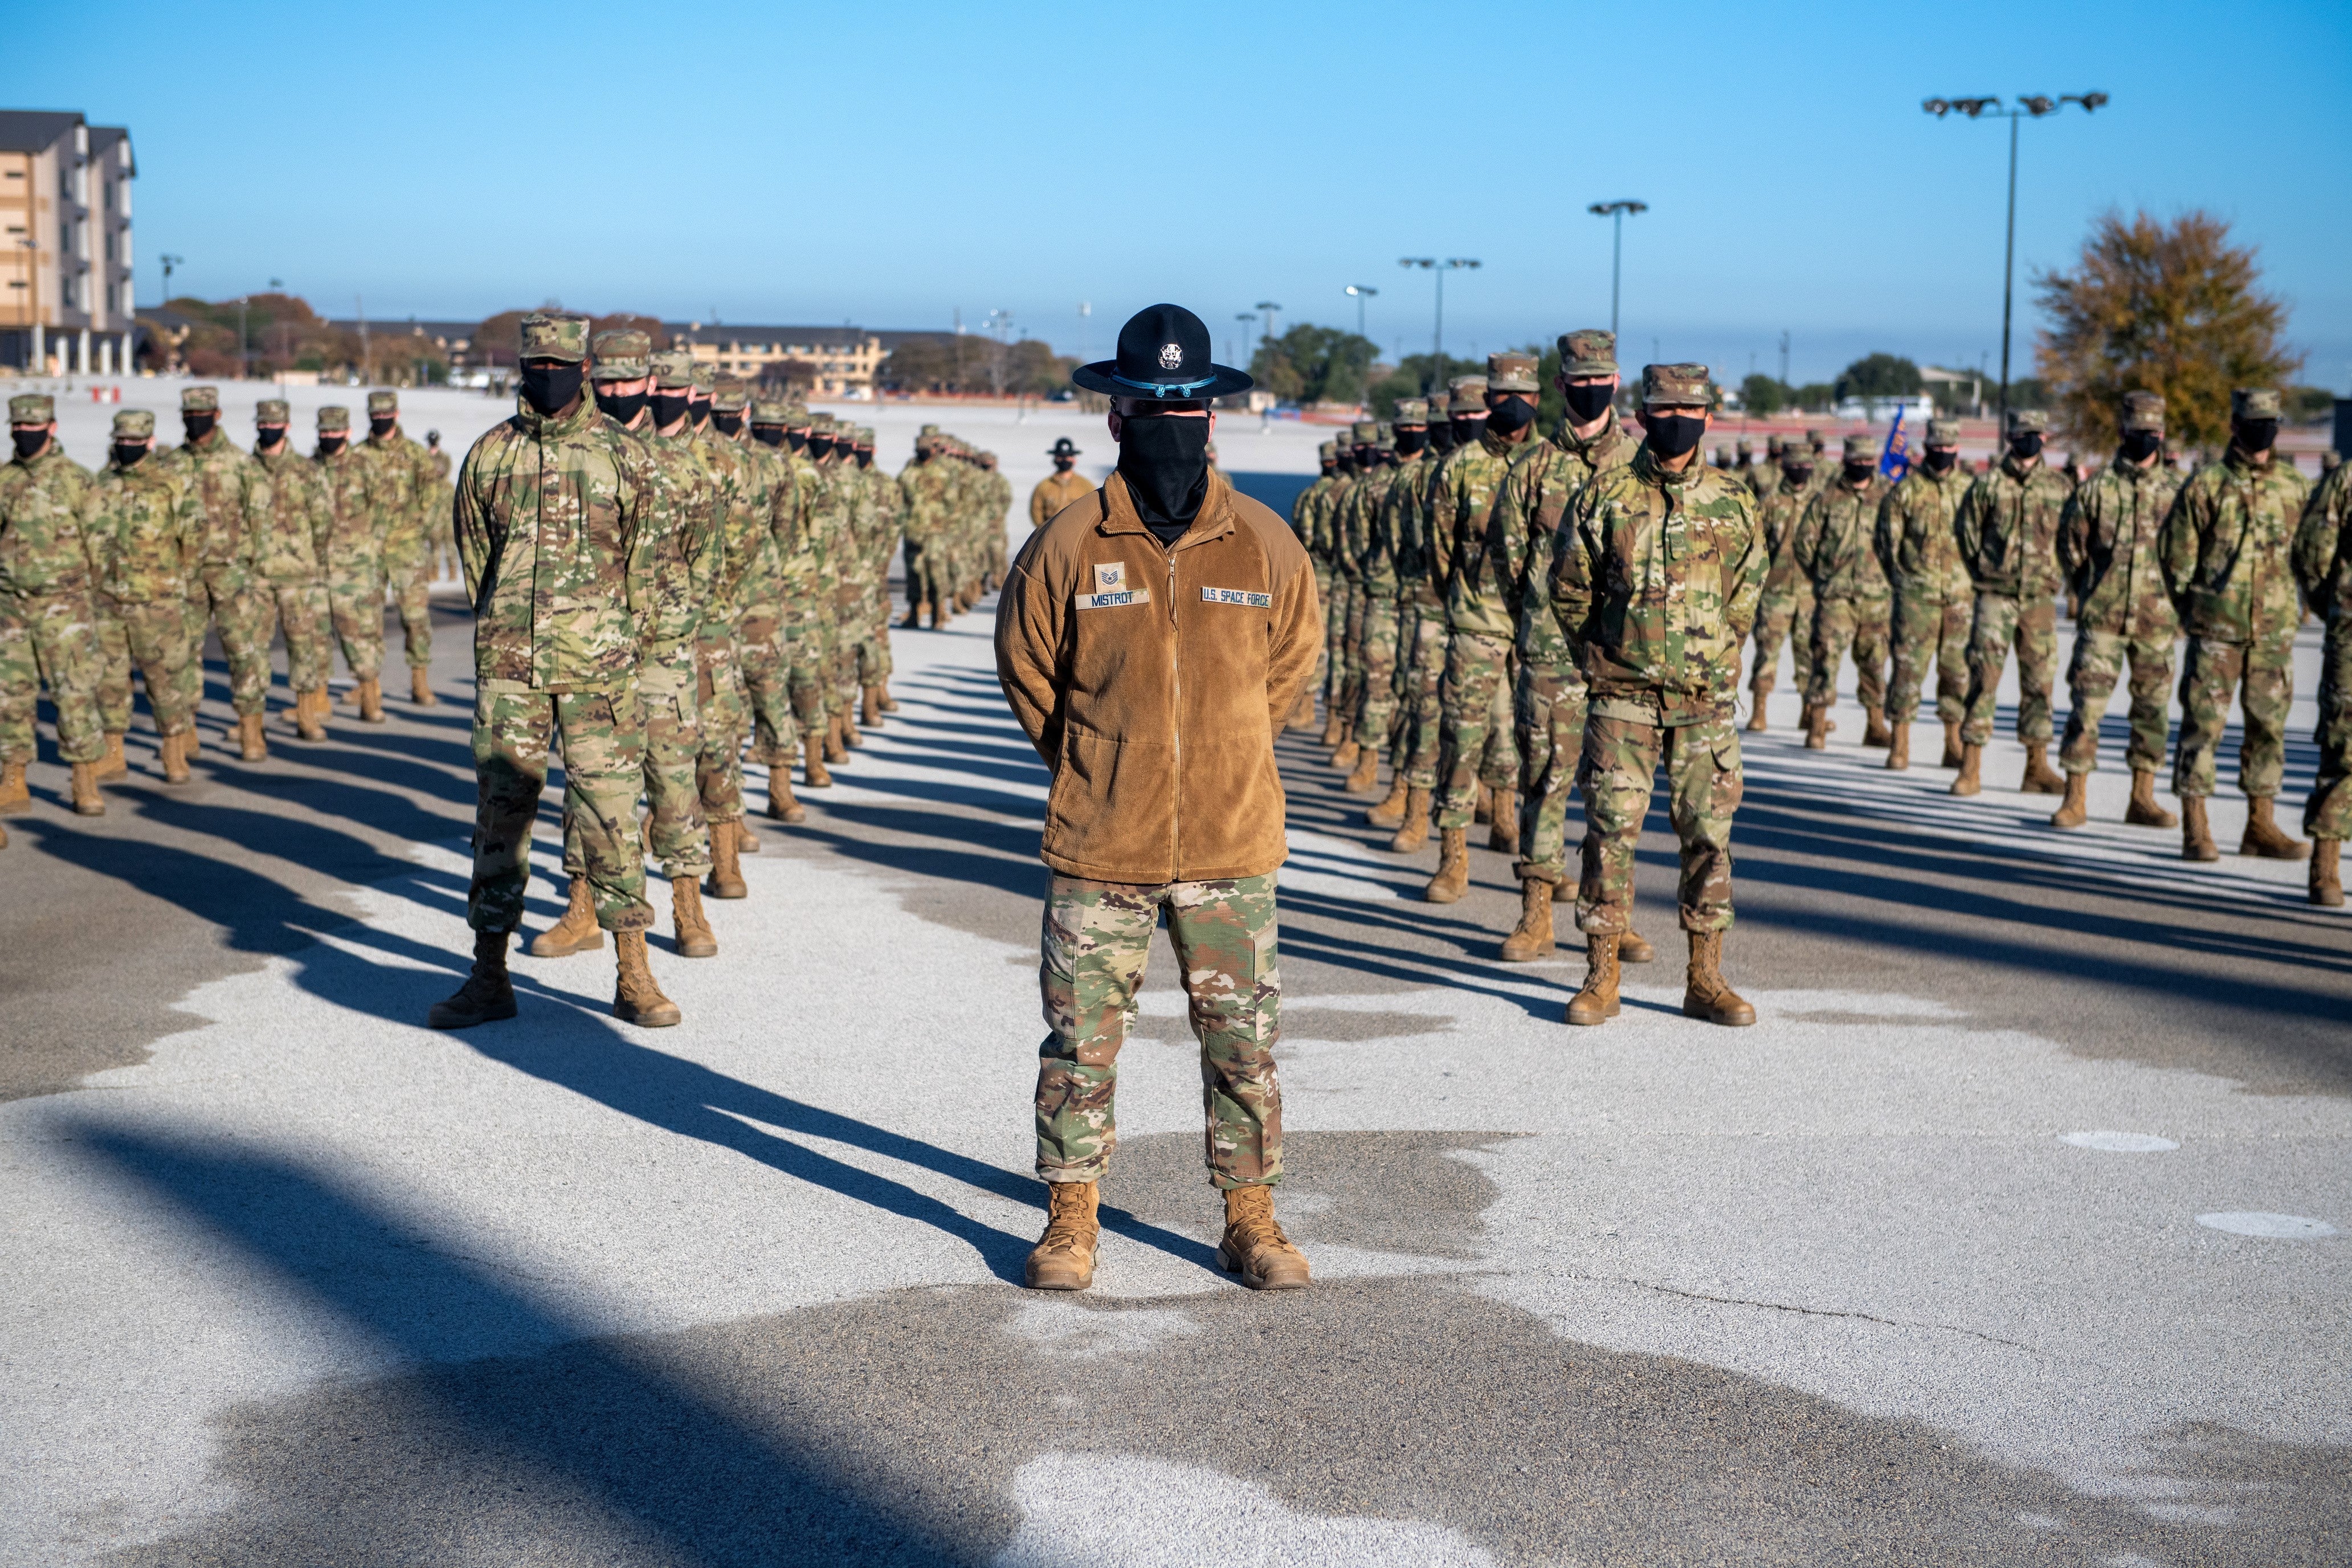 A Space Force military training instructor standing in front of his troops during a 2020 graduation ceremony held in San Antonio-Lackland, Texas.  (Photo: U.S. Space Force)